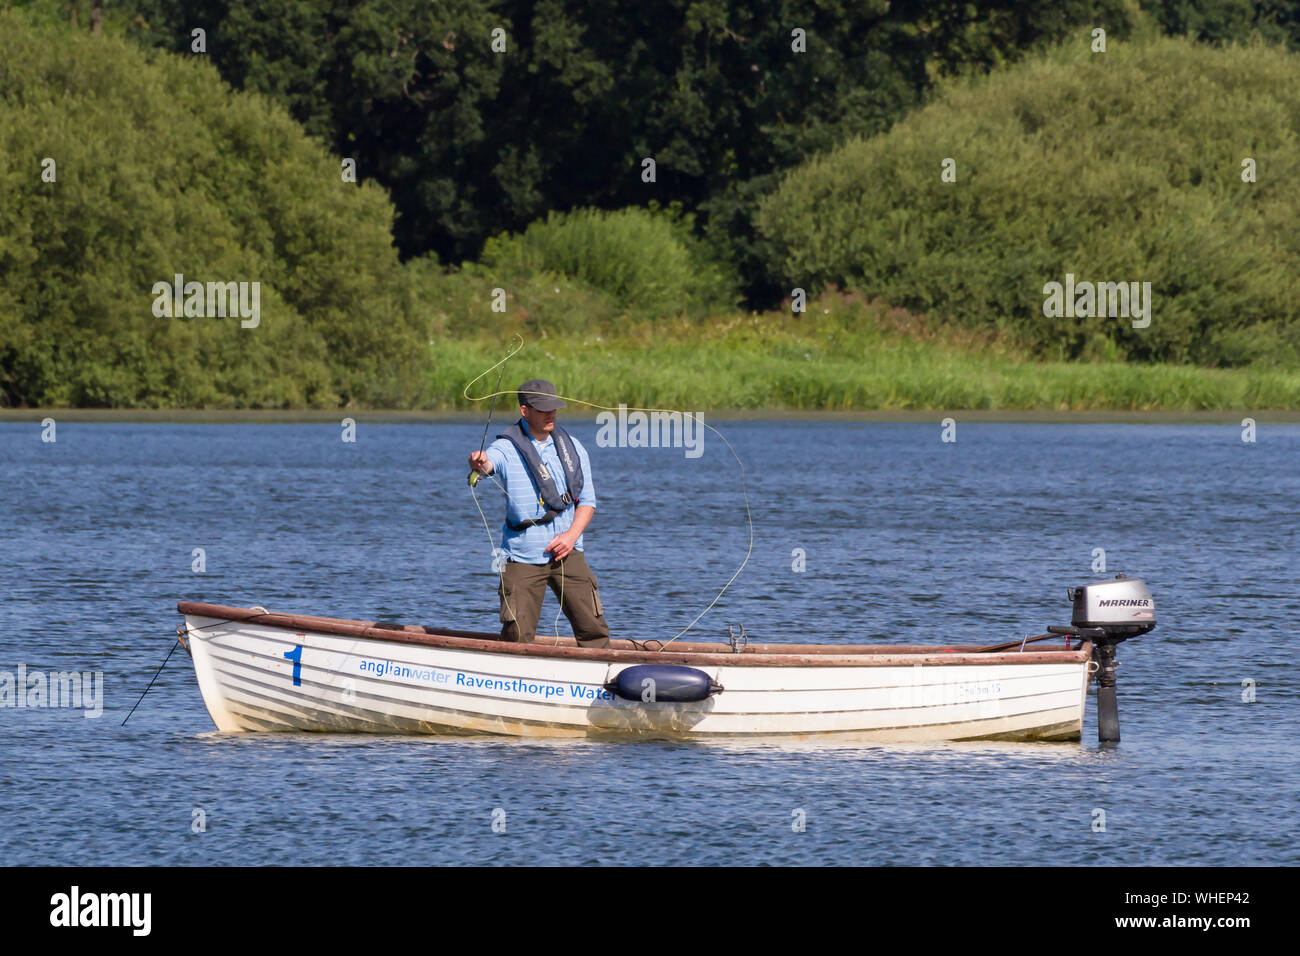 Ravensthorpe Reservoir, Northamptonshire, UK: An angler with a flat cap stands in a small boat with an outboard motor and casts his line. Stock Photo